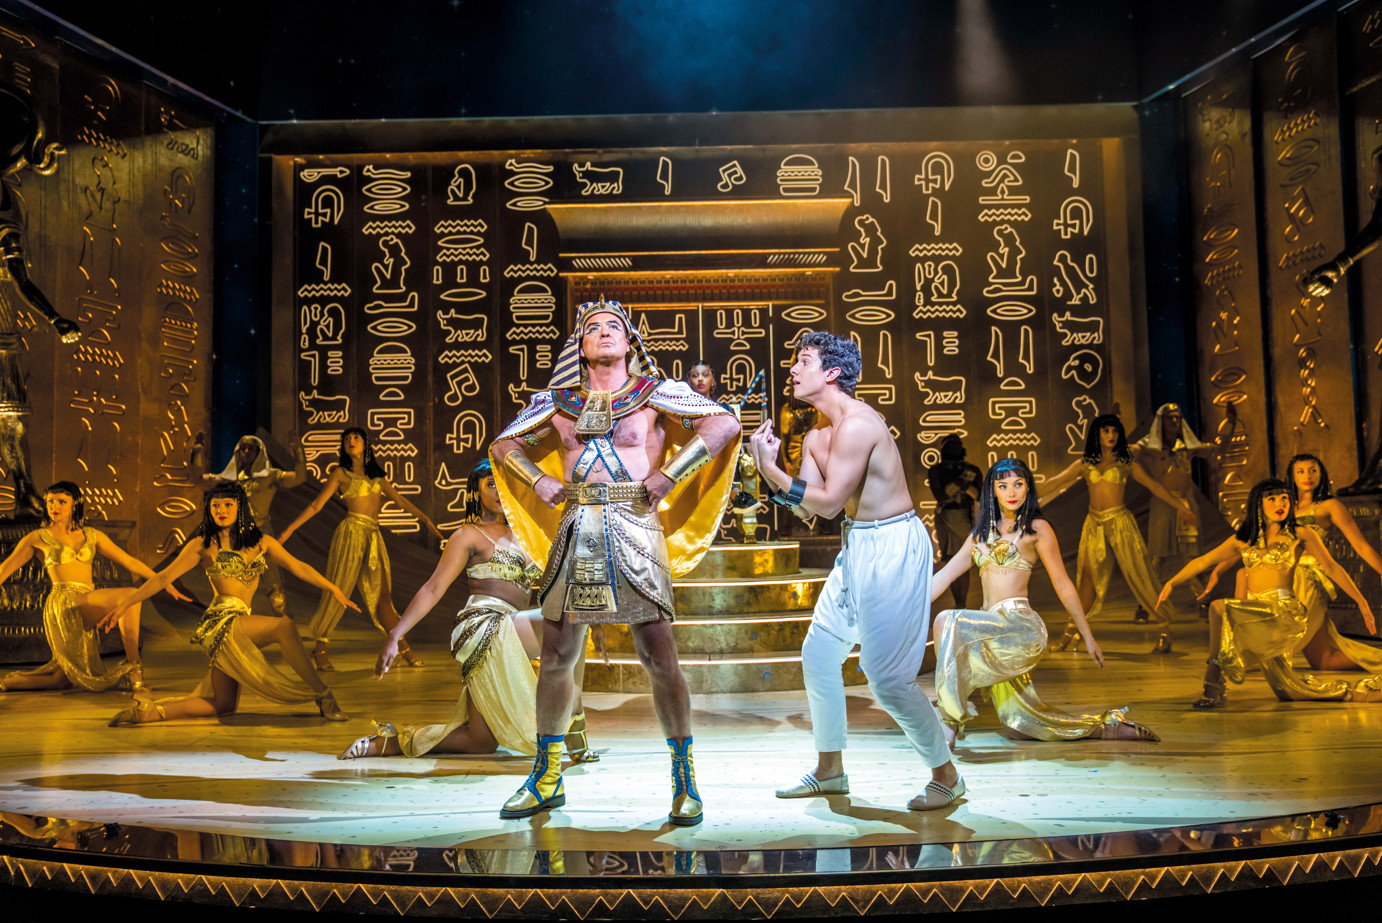 ‘joseph and the amazing technicolor dreamcoat' is back!